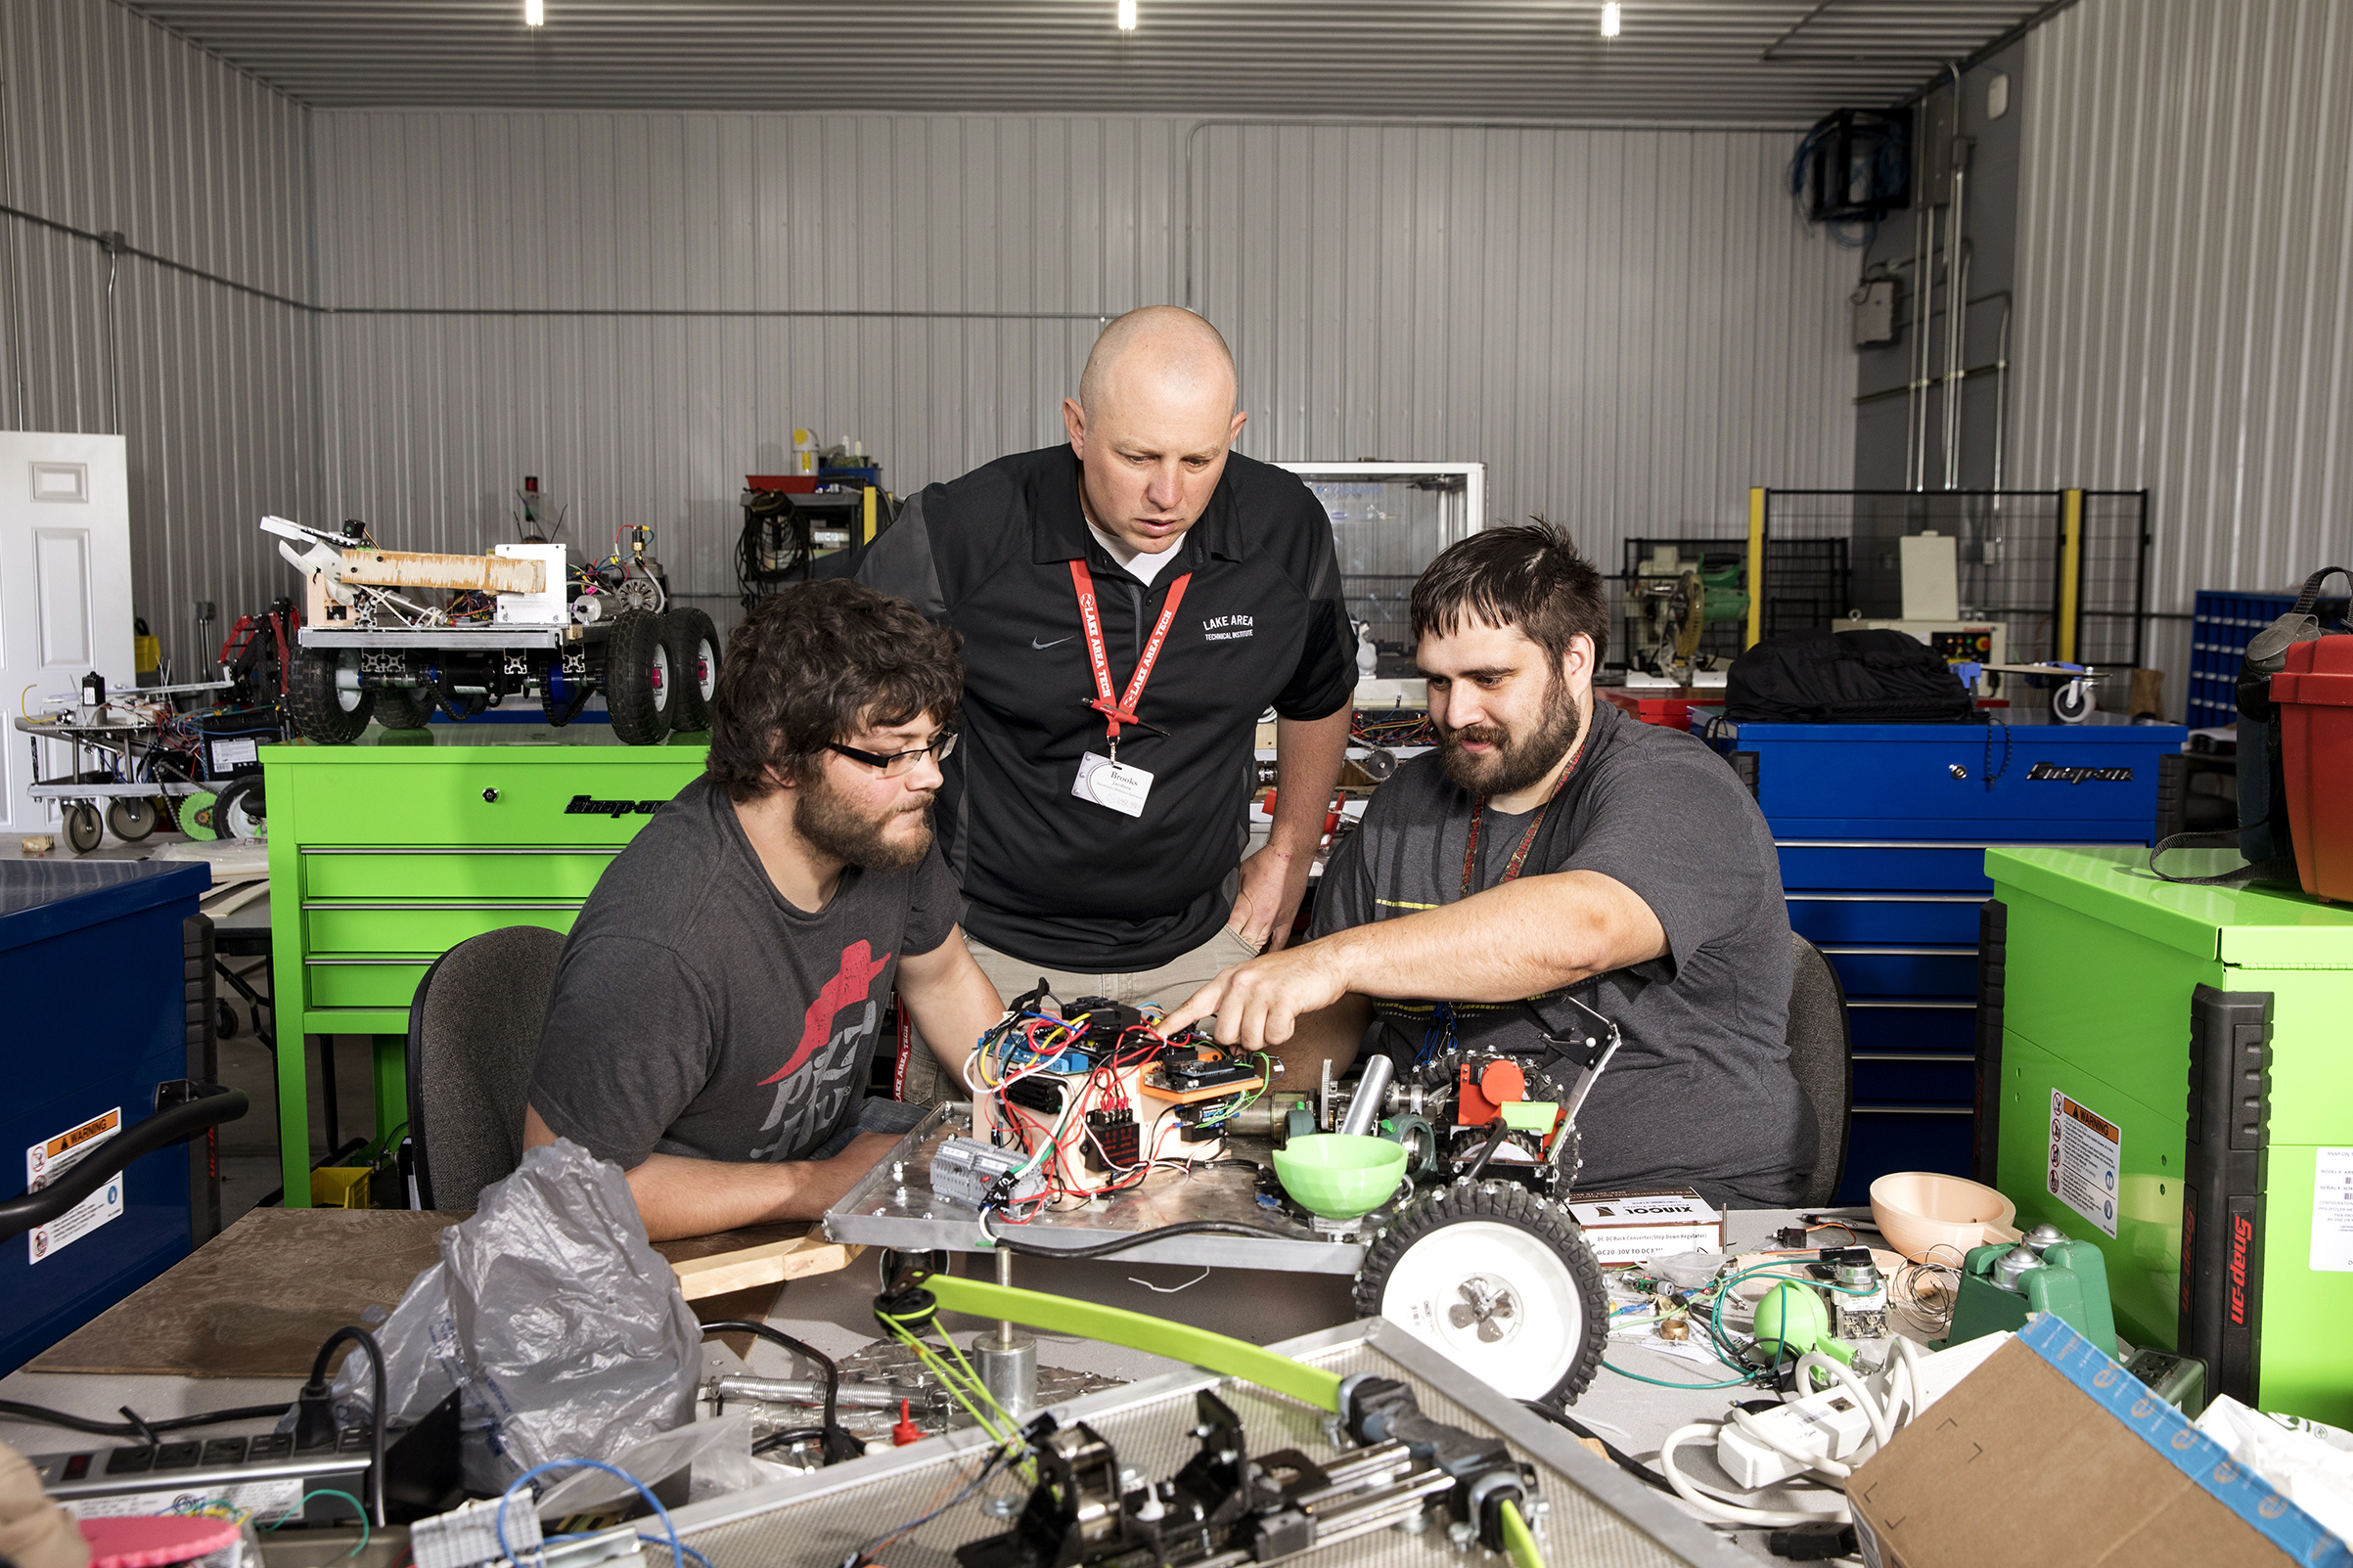 LATI instructor Brooks Jacobsen works with students in the school’s robotics lab (Ackerman + Gruber for TIME)